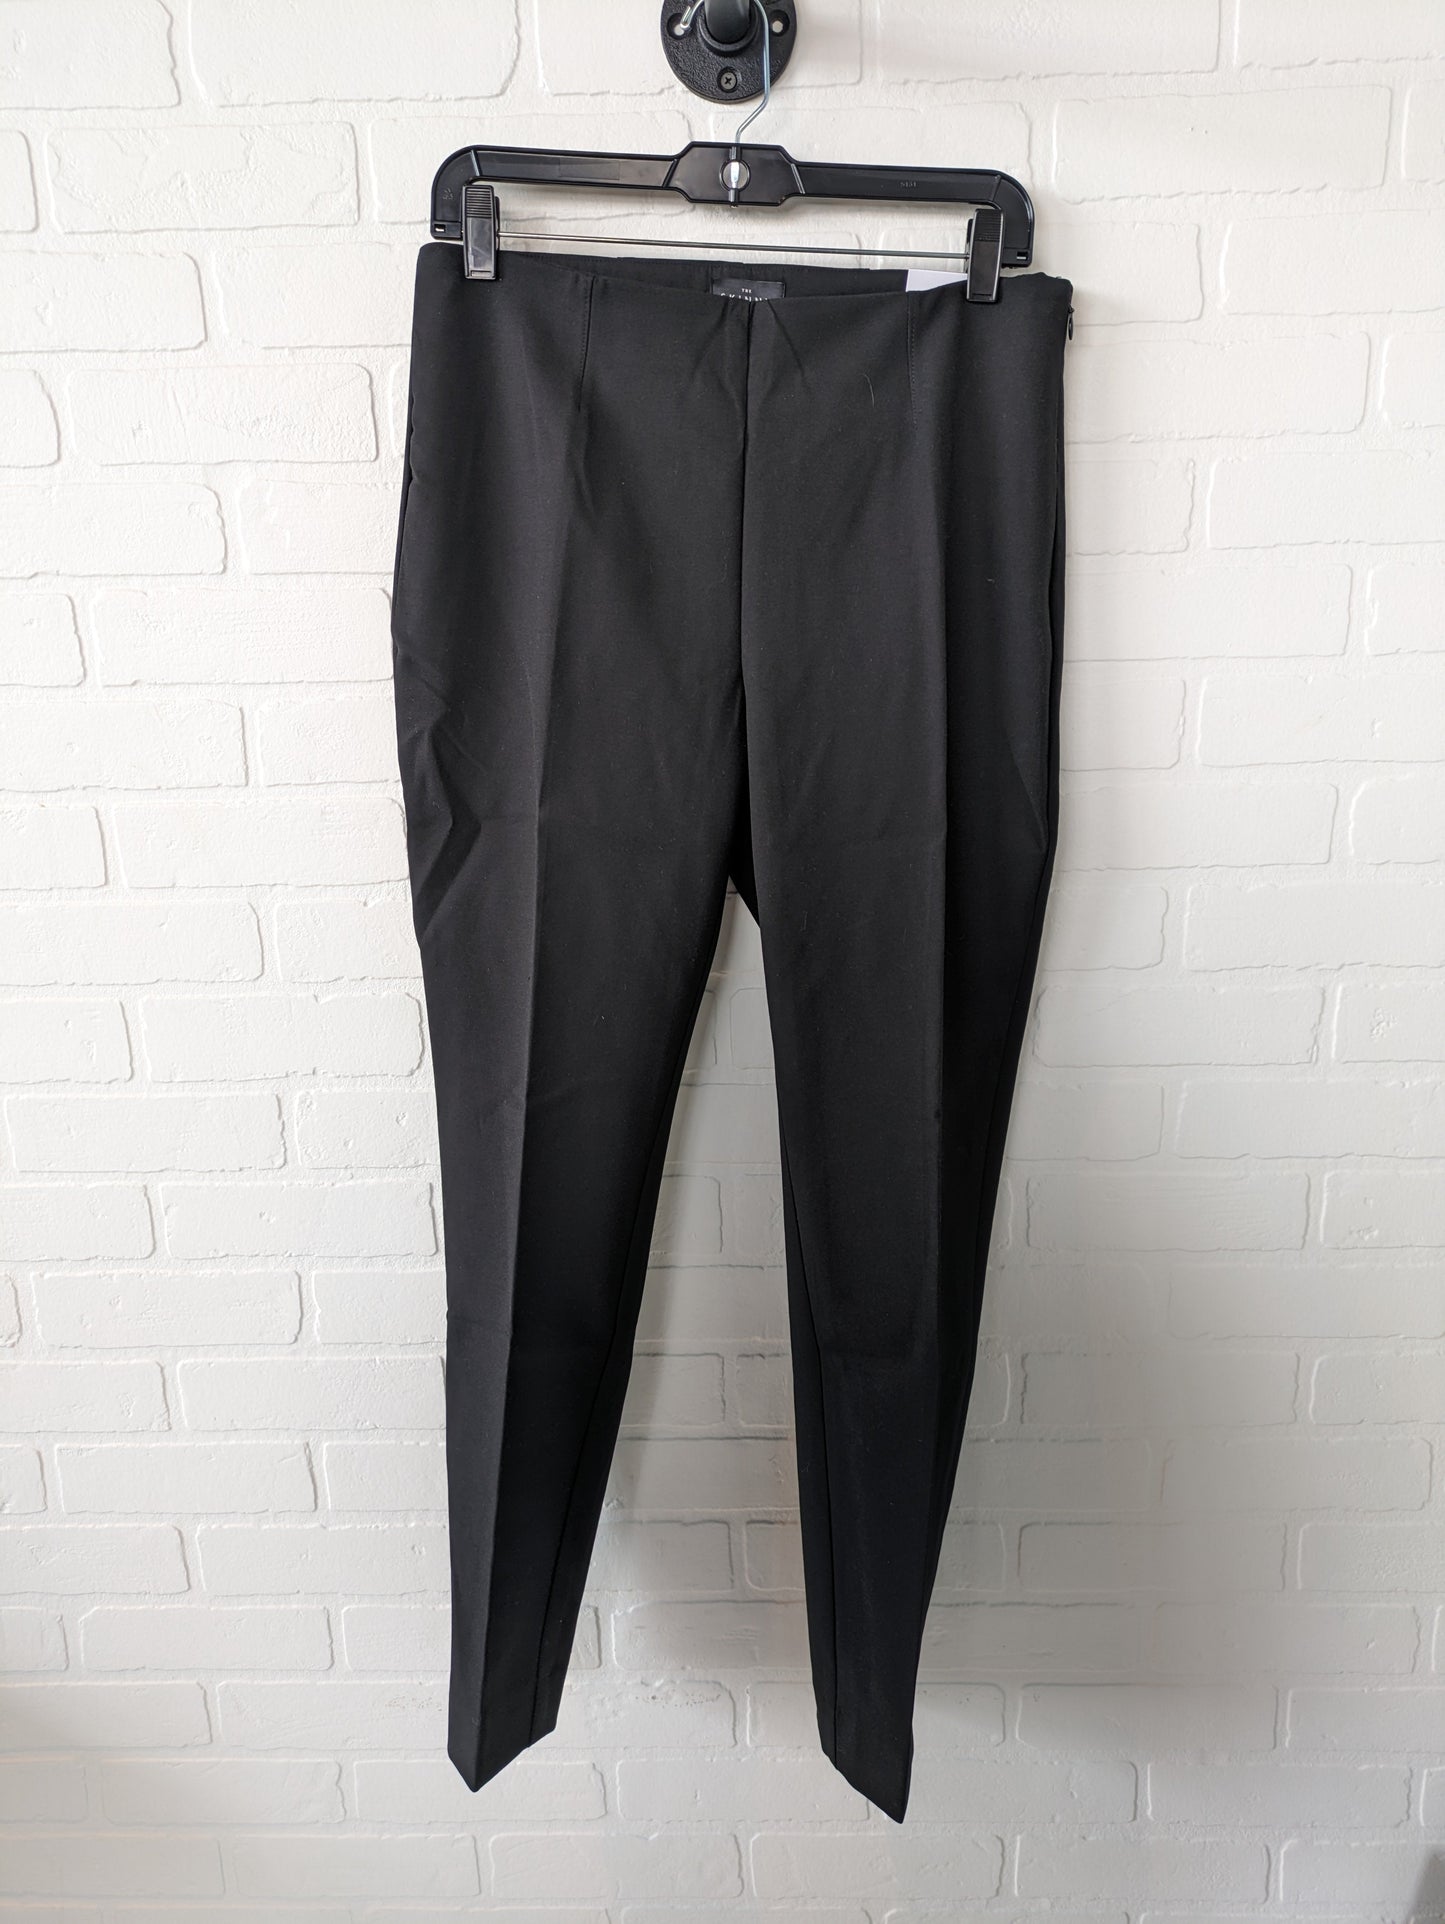 Pants Ankle By White House Black Market  Size: 8